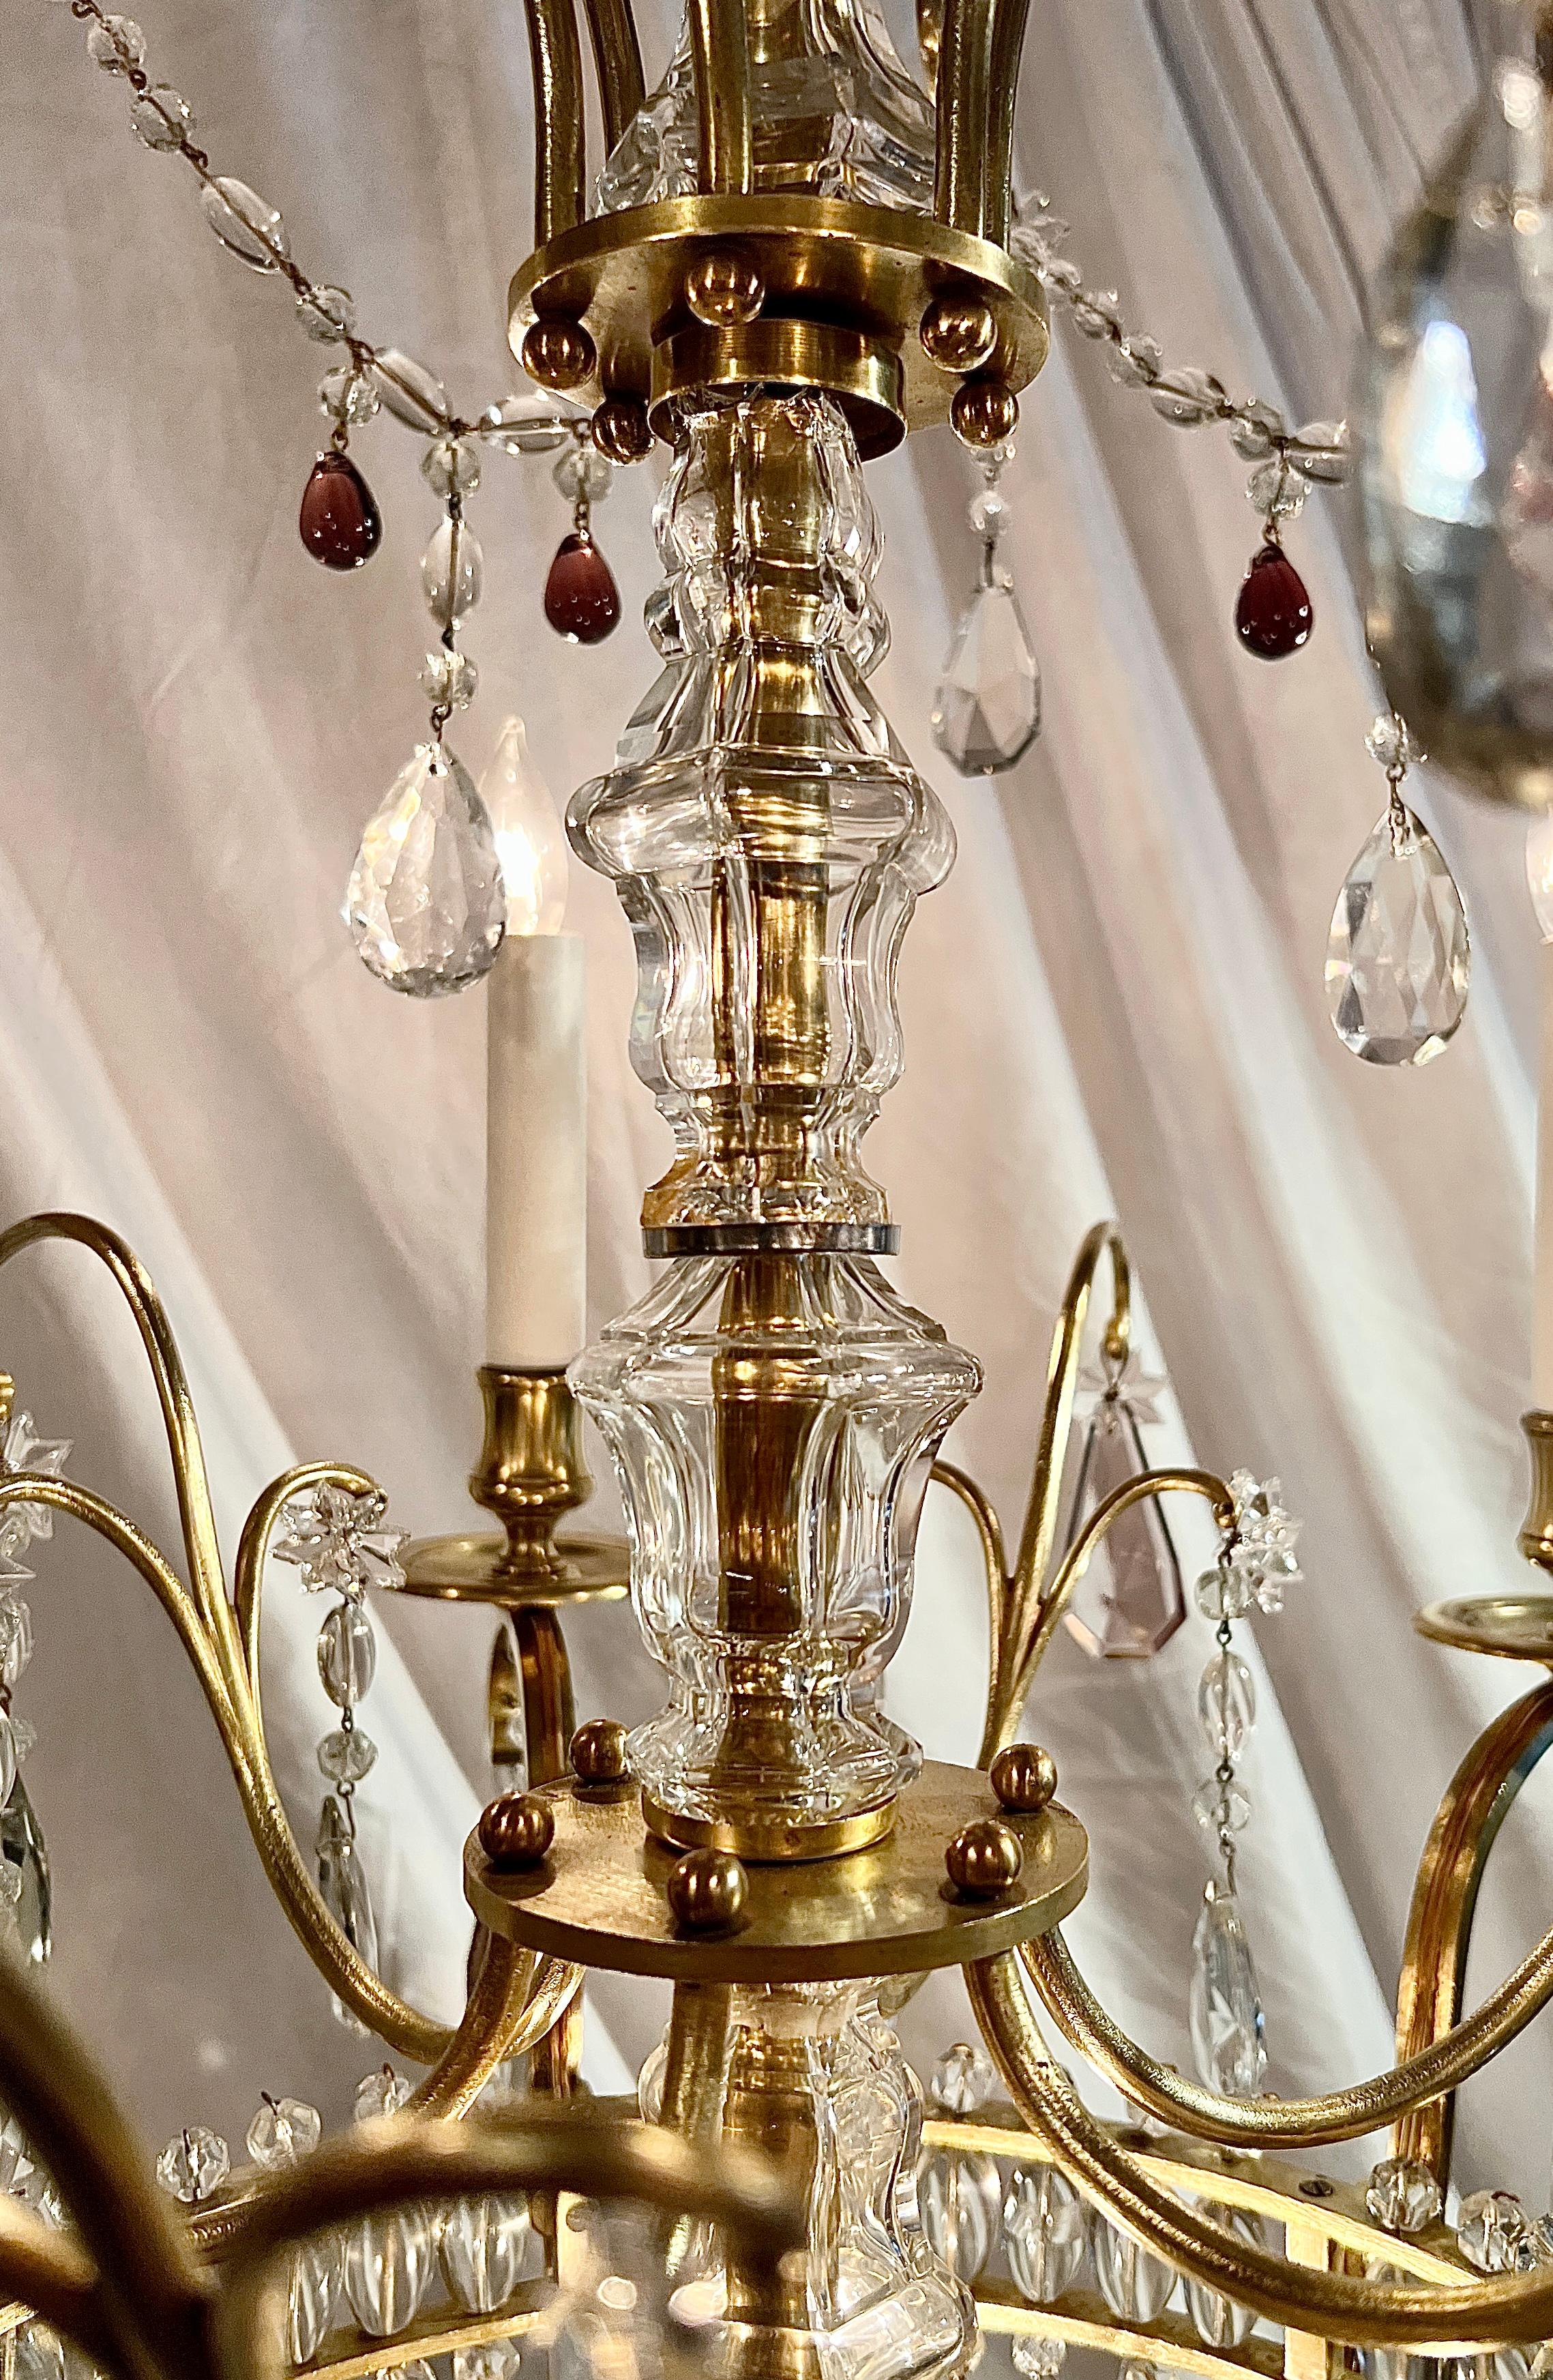 Antique French Clear & Colored Cut Crystal and Gold Bronze Chandelier, Circa 1890.
Elegant chandelier in an unusual and pretty shape with heavily draped crystals. 